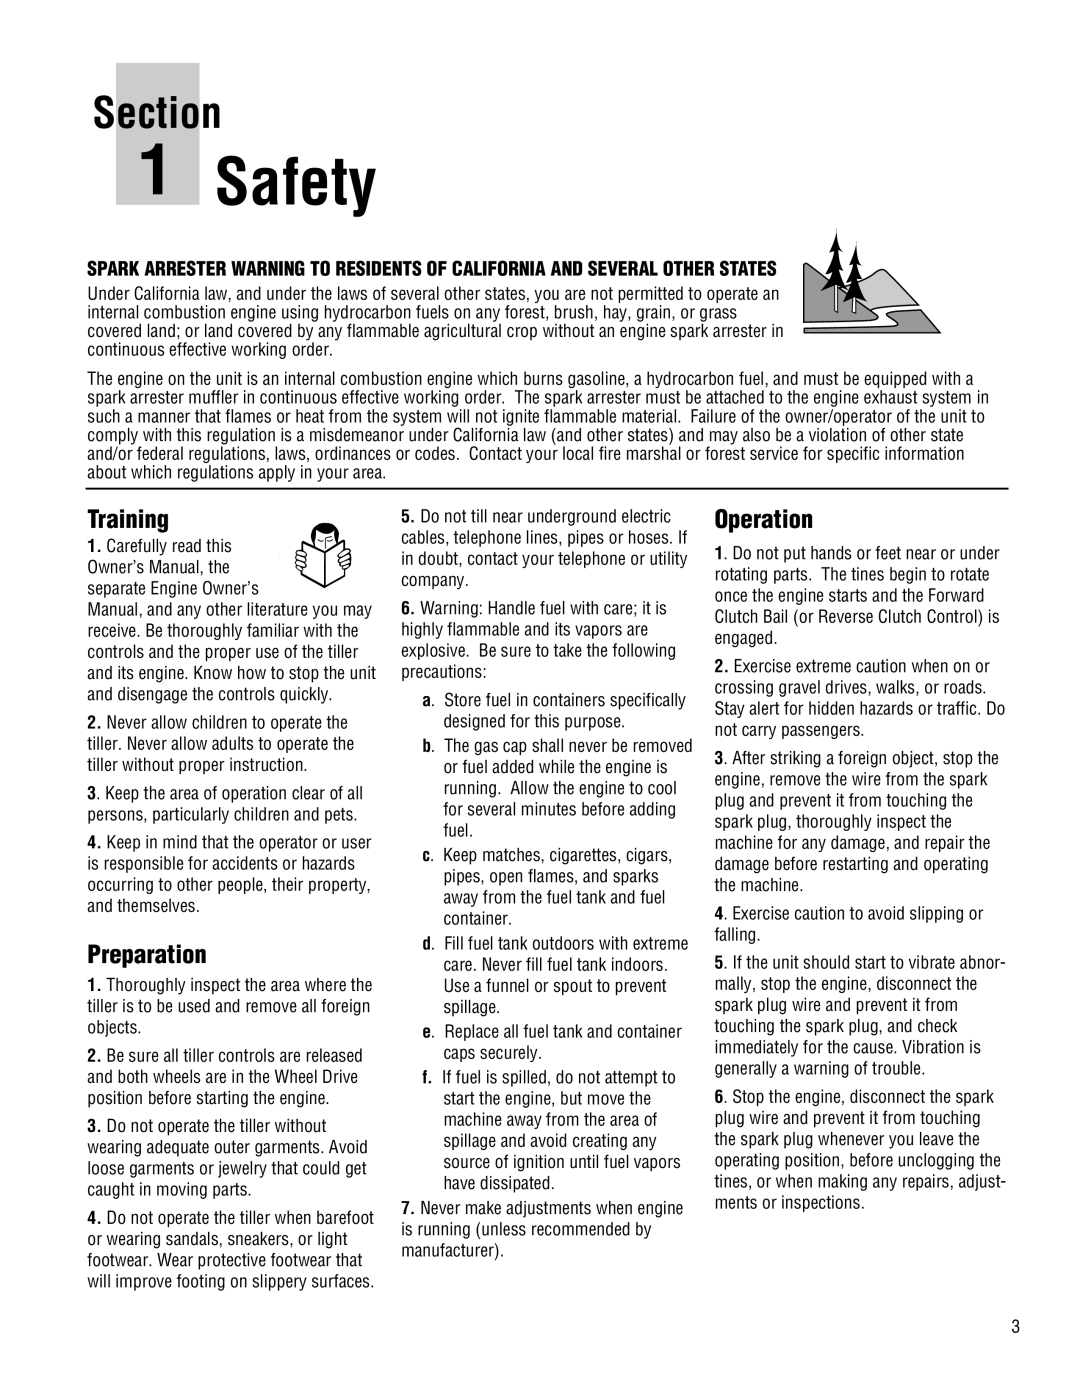 Troy-Bilt 645A-Bronco manual Safety, Section, Training, Preparation, Operation 